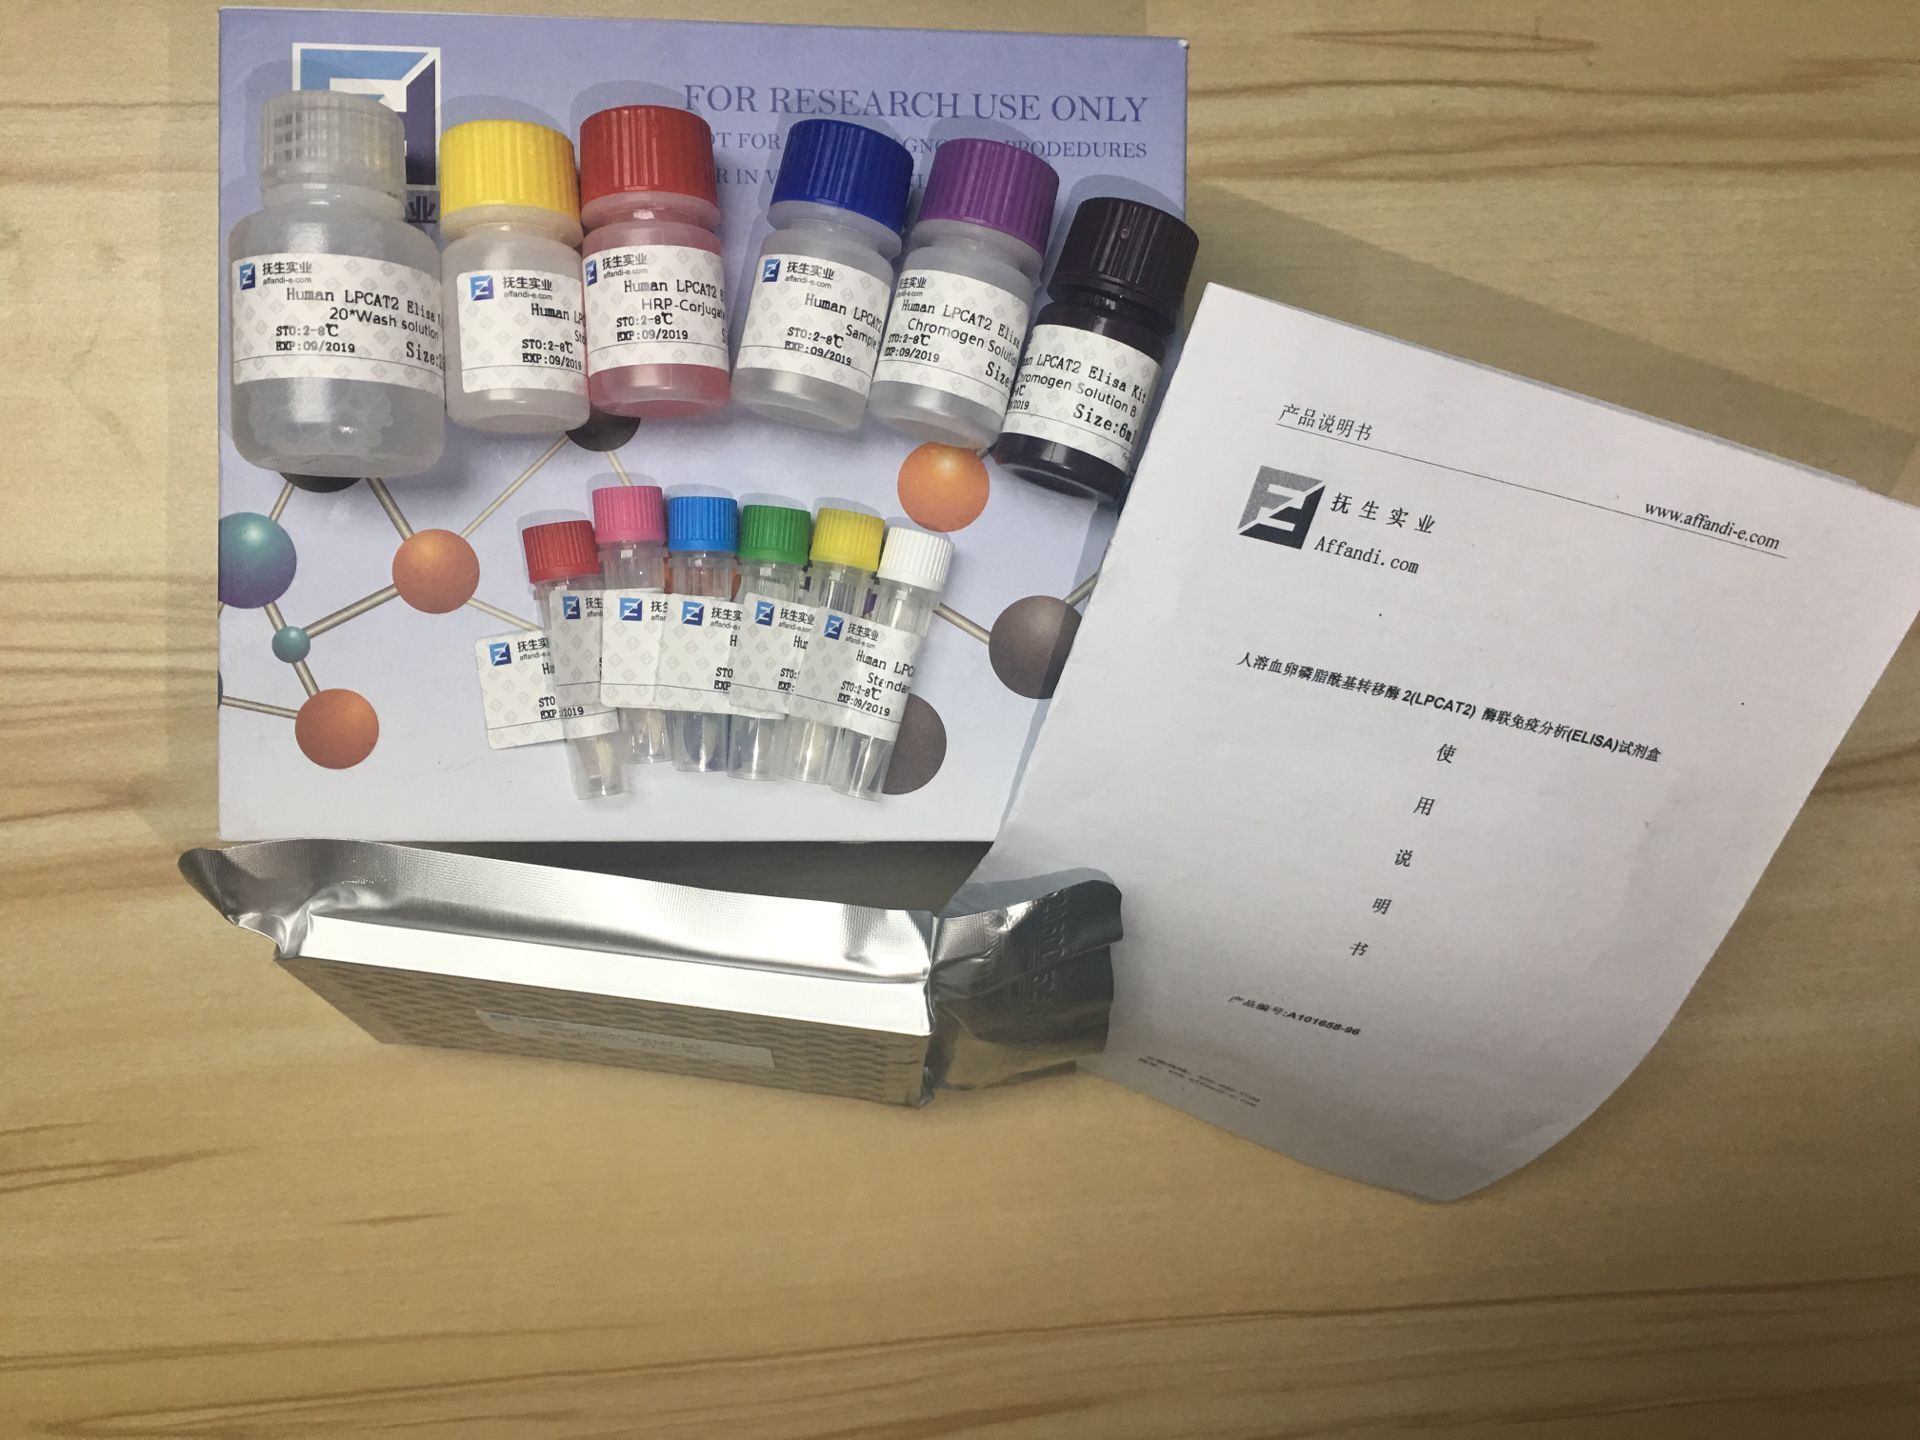 Mouse TRY ELISA Kit